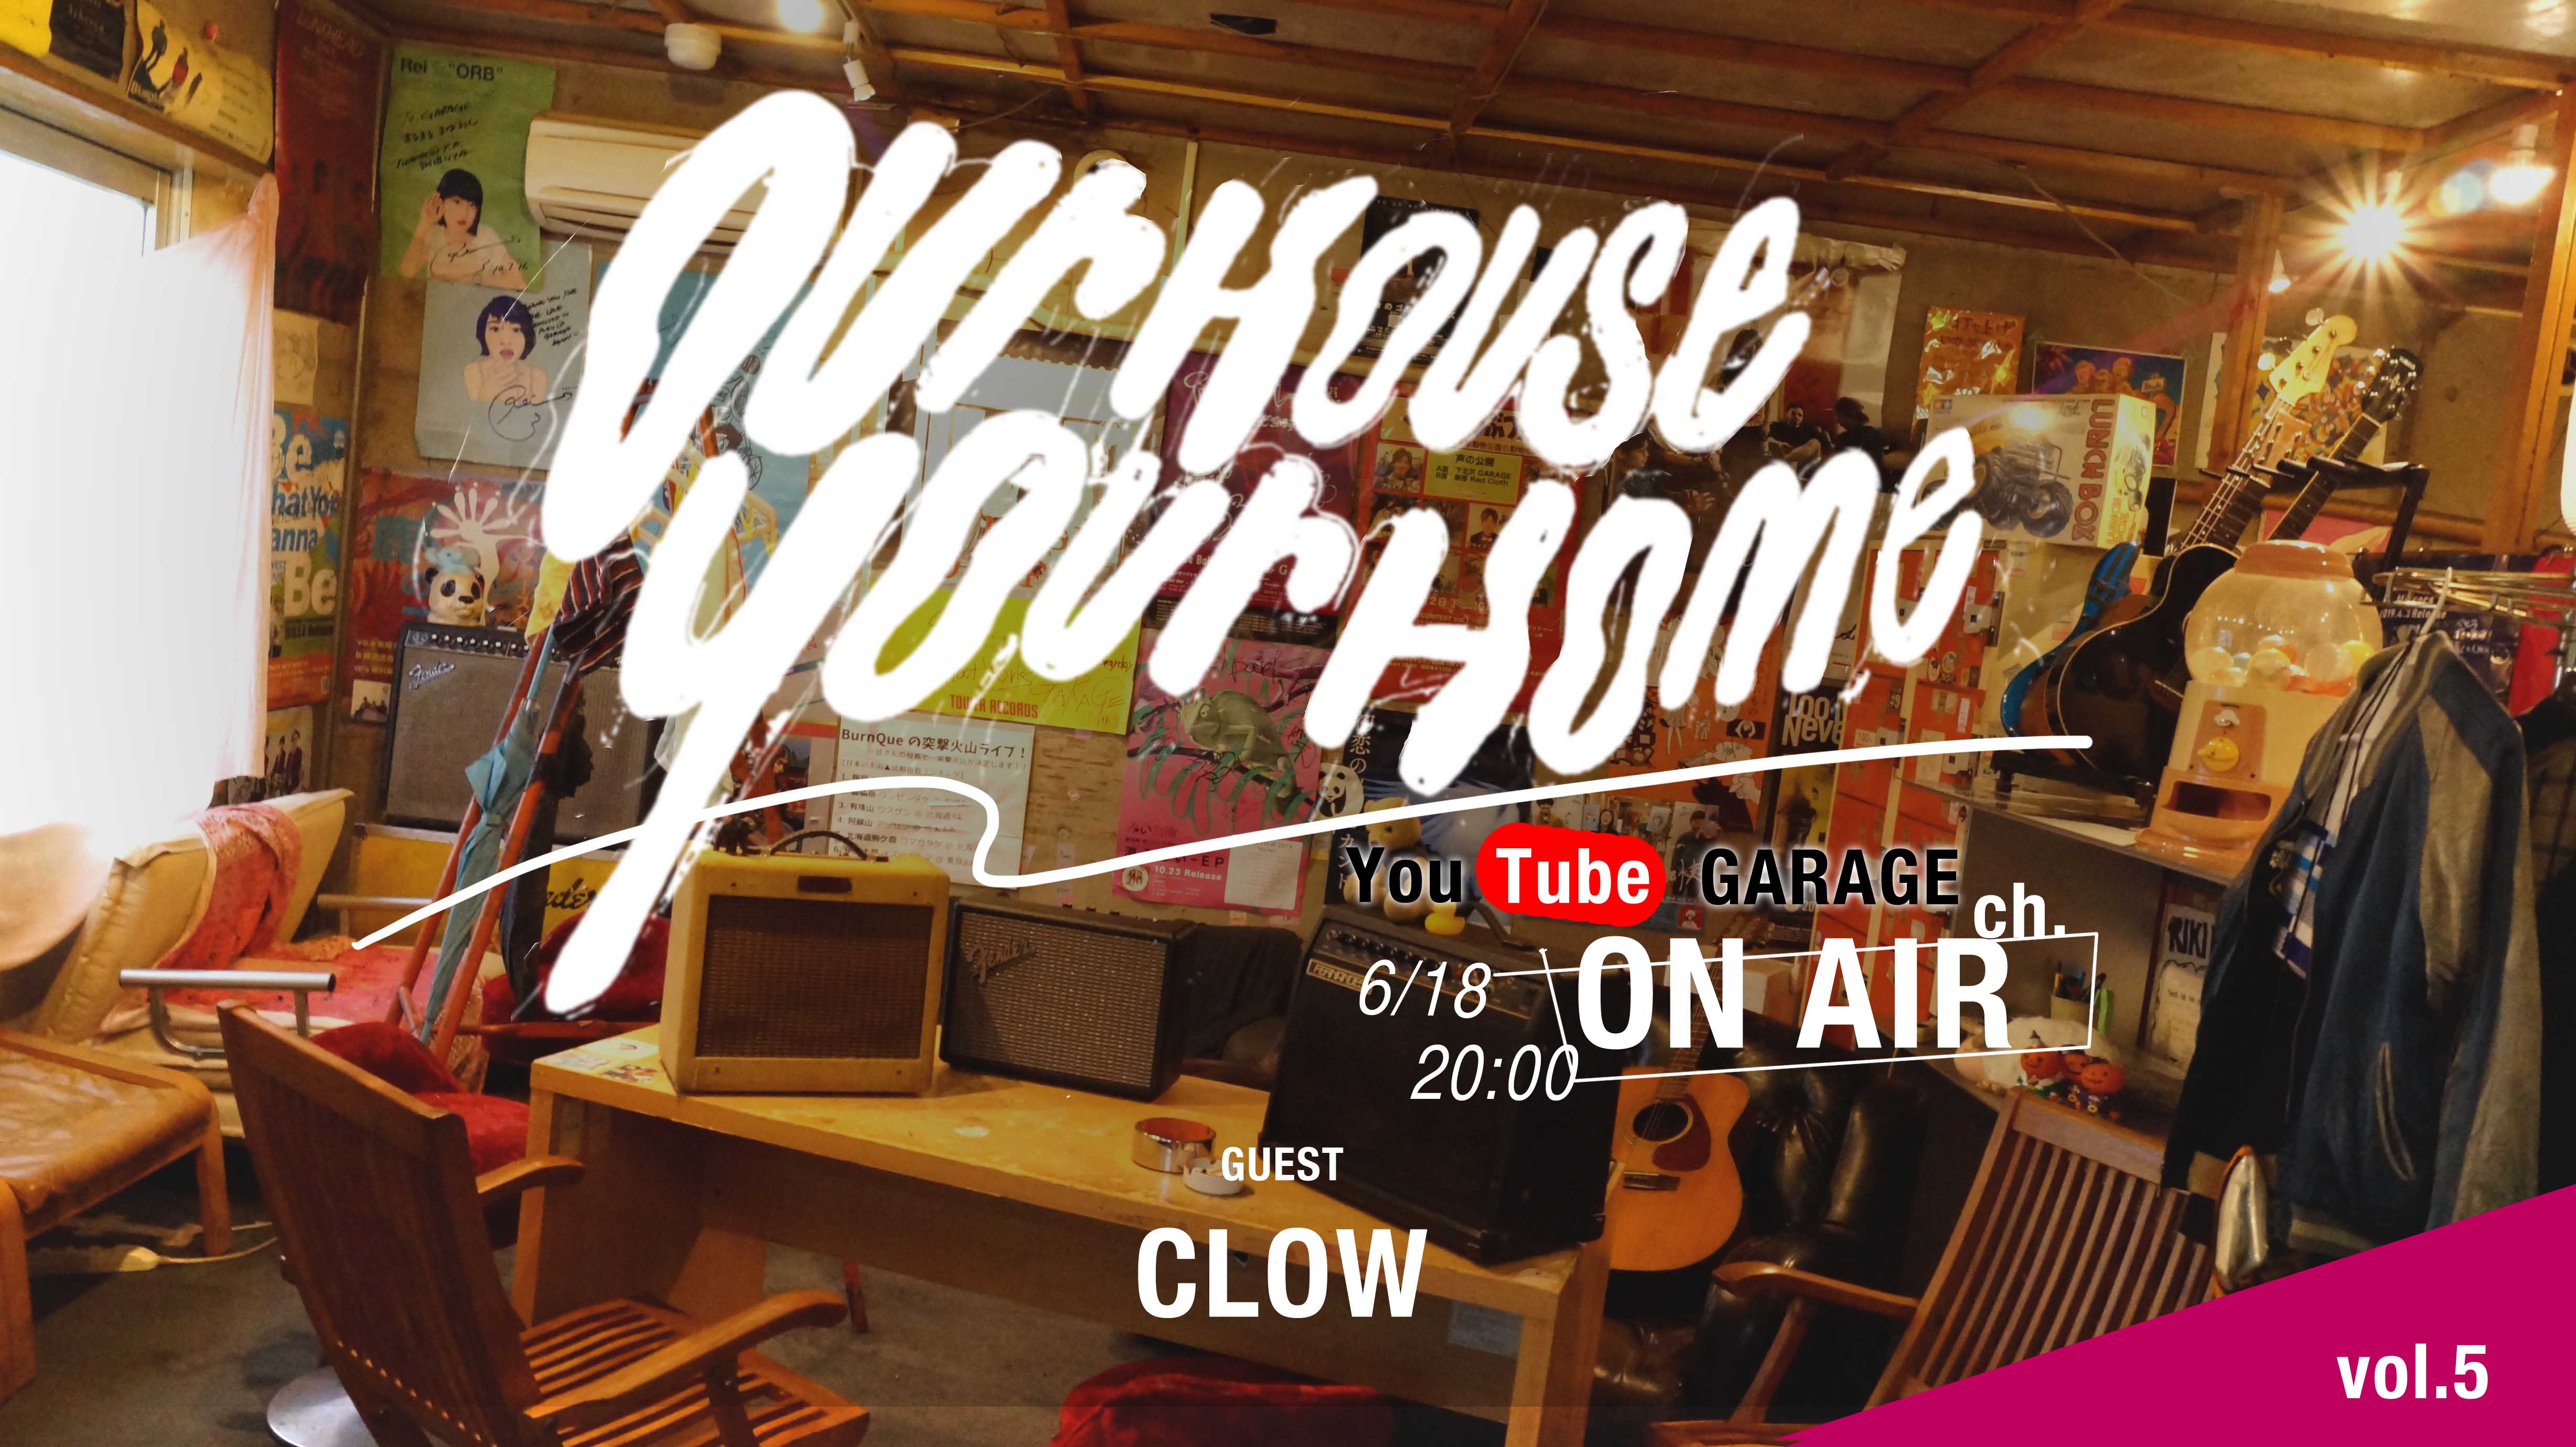 Our House Your Home vol.5